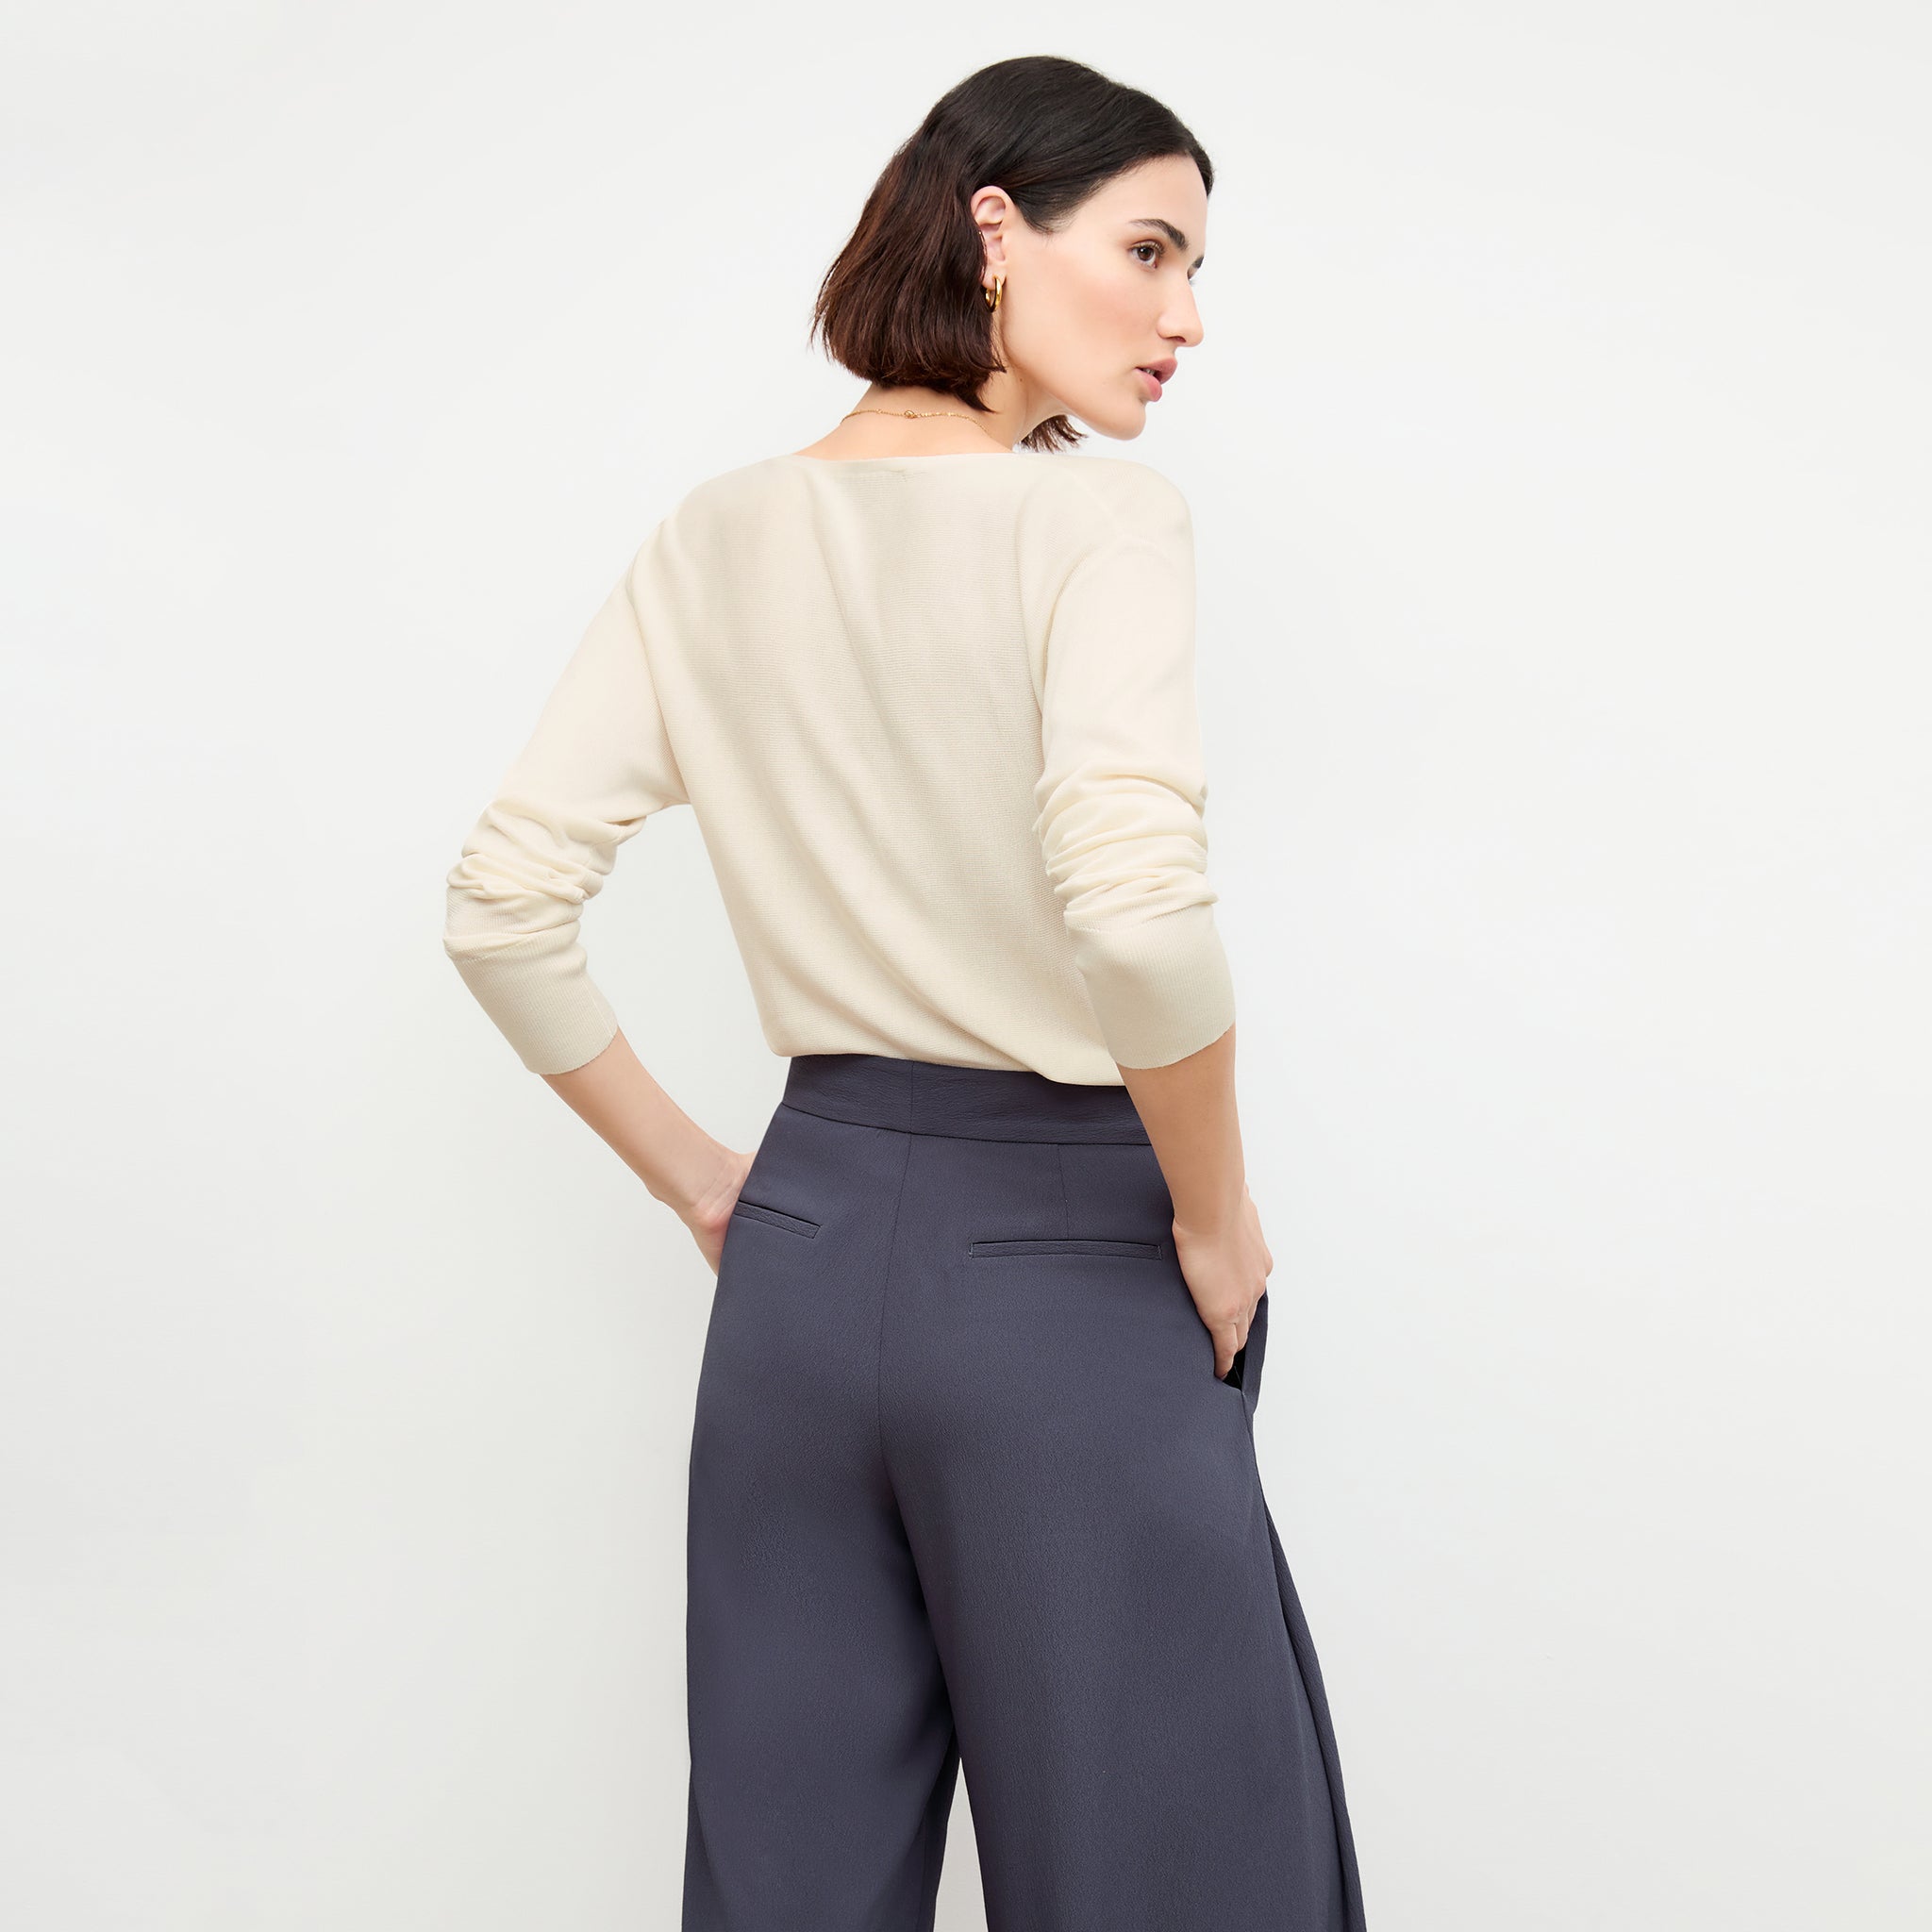 back image of a woman wearing the monica top in cream